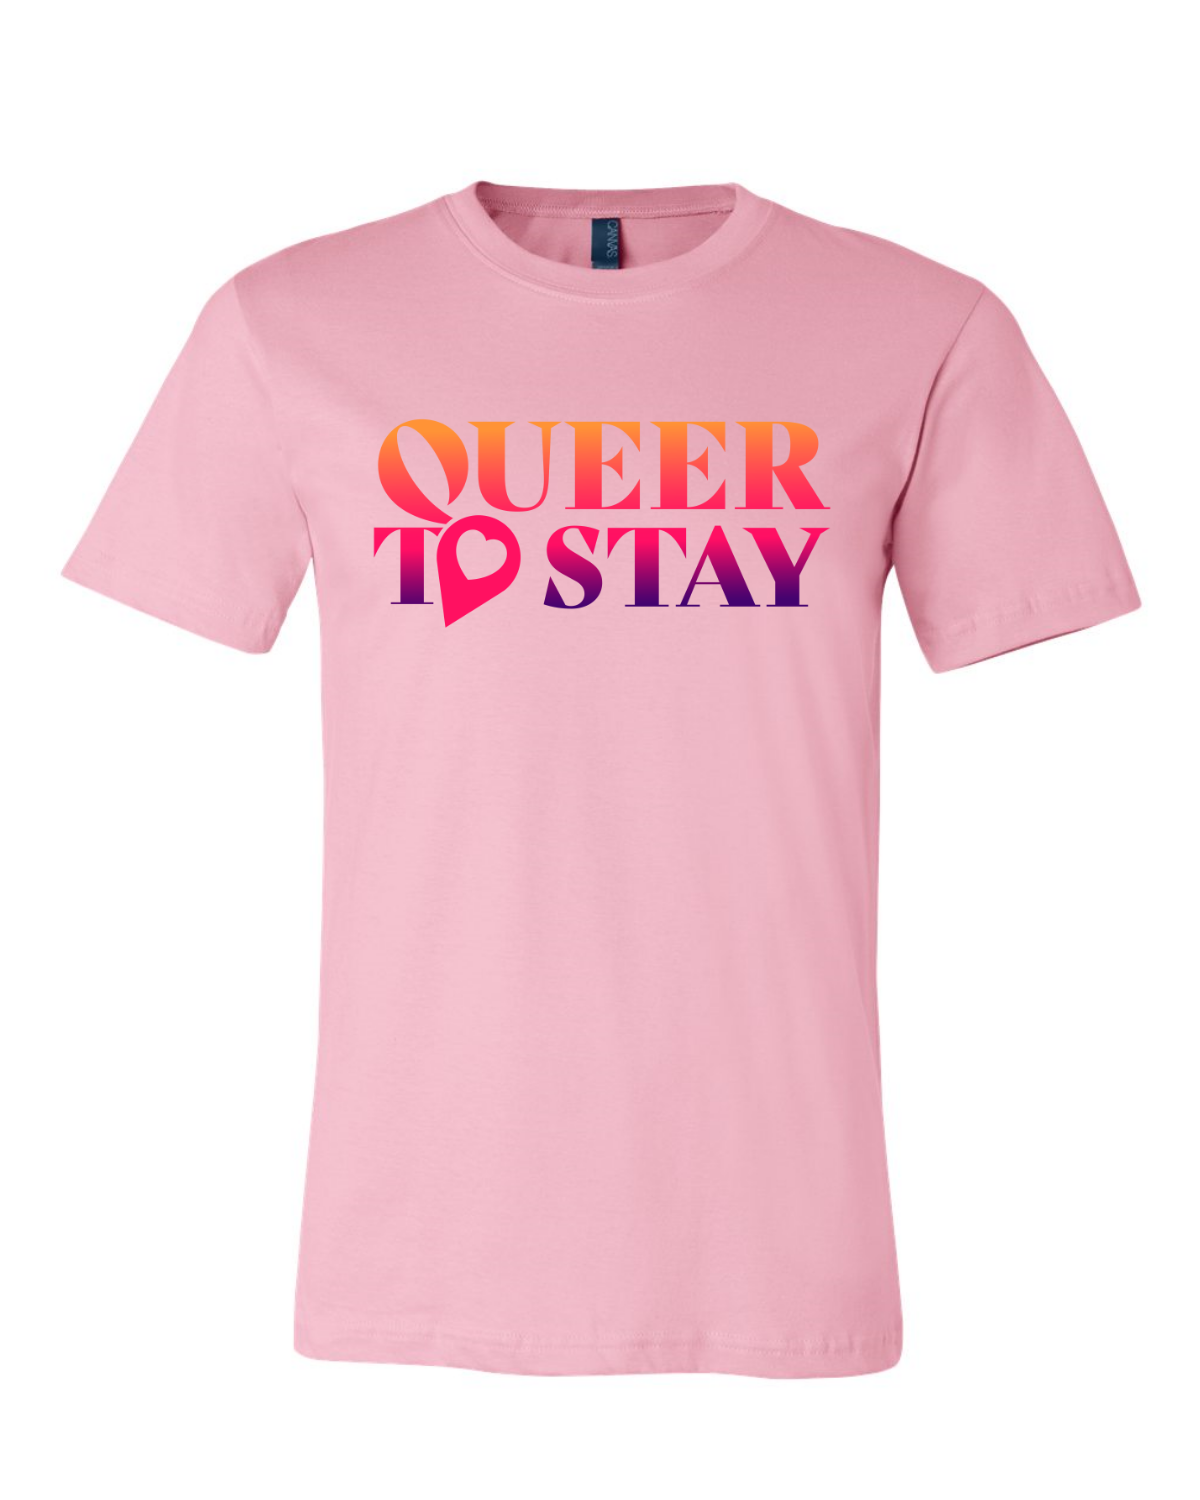 SHOWTIME Queer to Stay Adult Short Sleeve T-Shirt